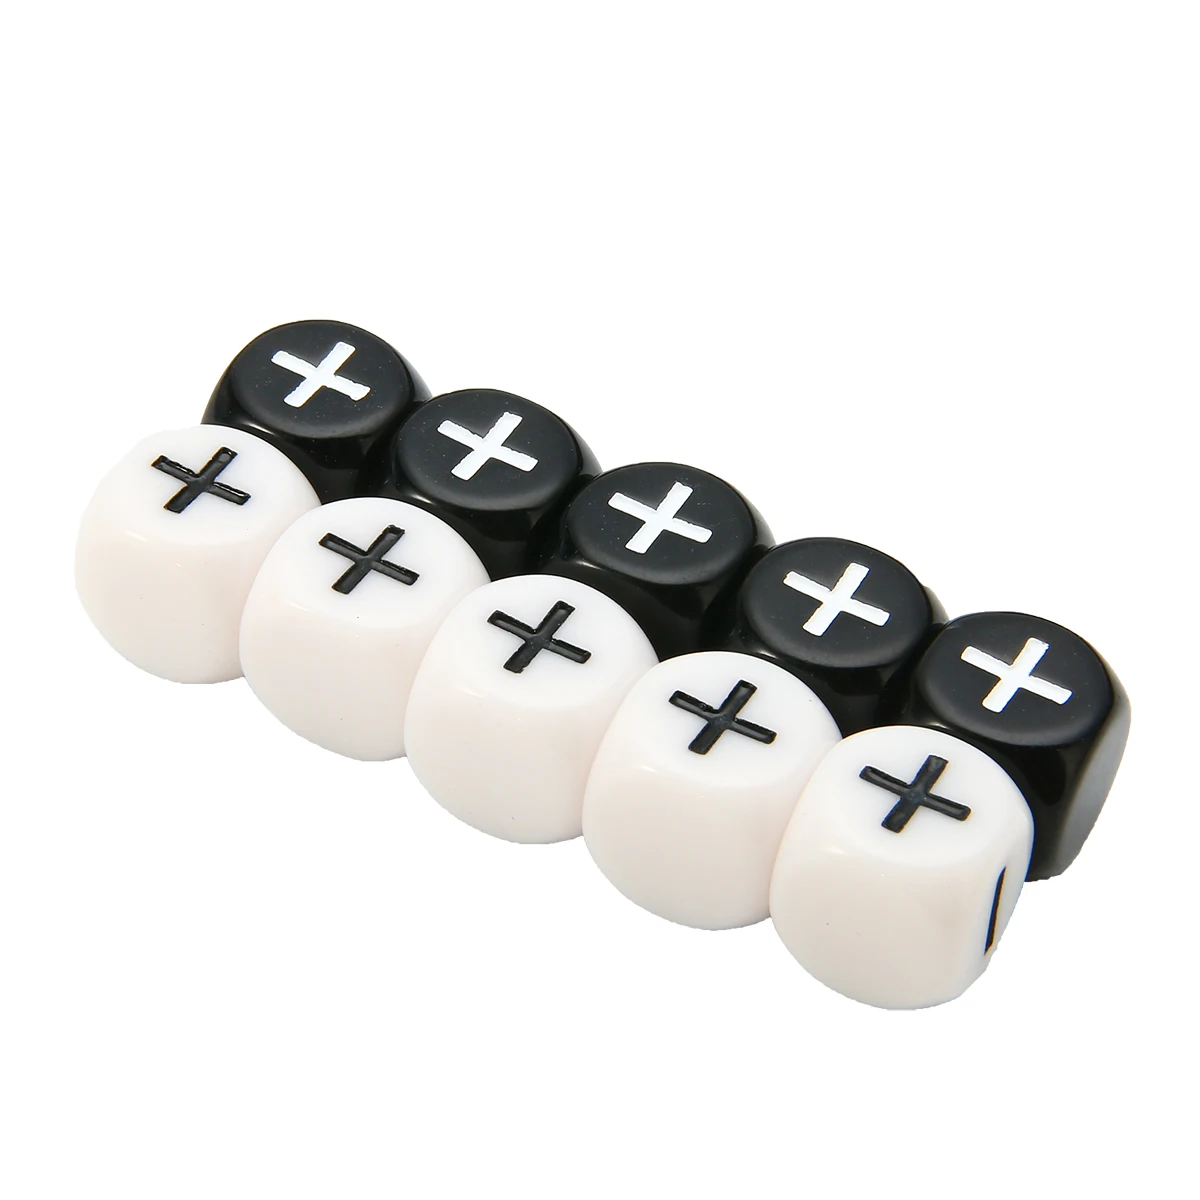 12Pcs Black White 6 sided Dice Minus Sign Plus Sign Dice Counting Dice For Party